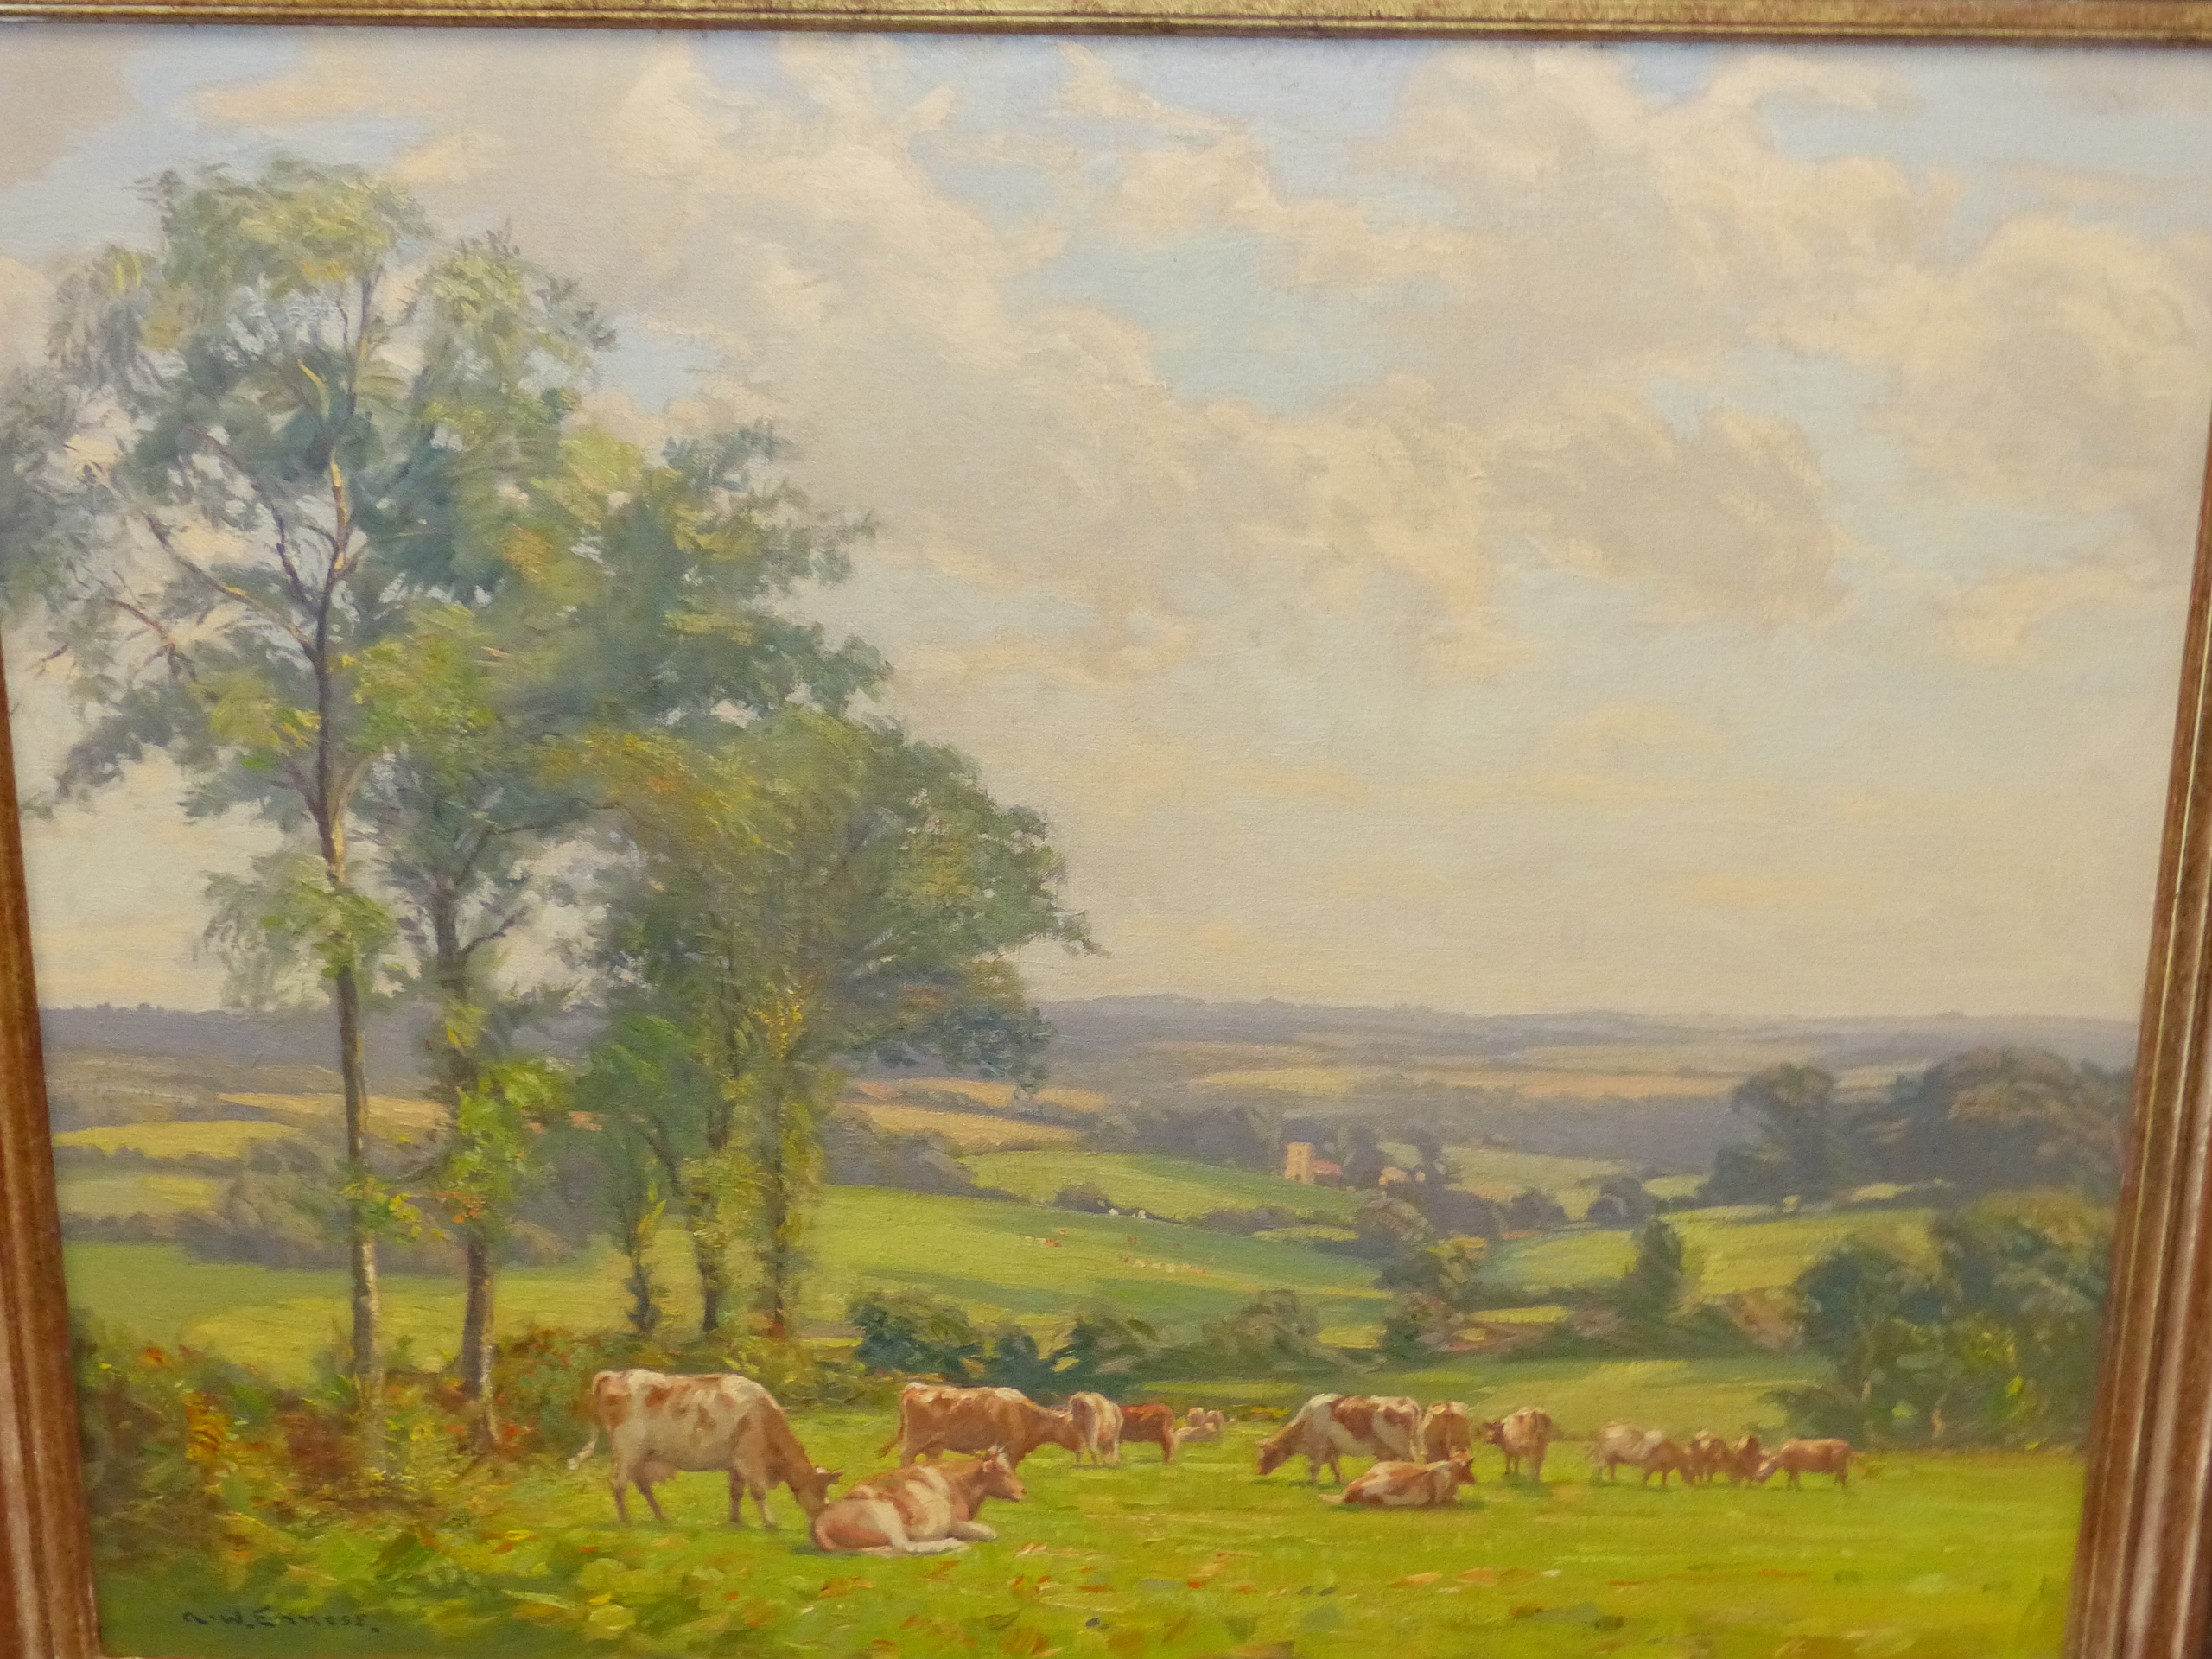 A.W ENNESS (1876-1948) CATTLE IN A MEADOW, SIGNED OIL ON CANVAS 67 x 82cm - Image 2 of 7